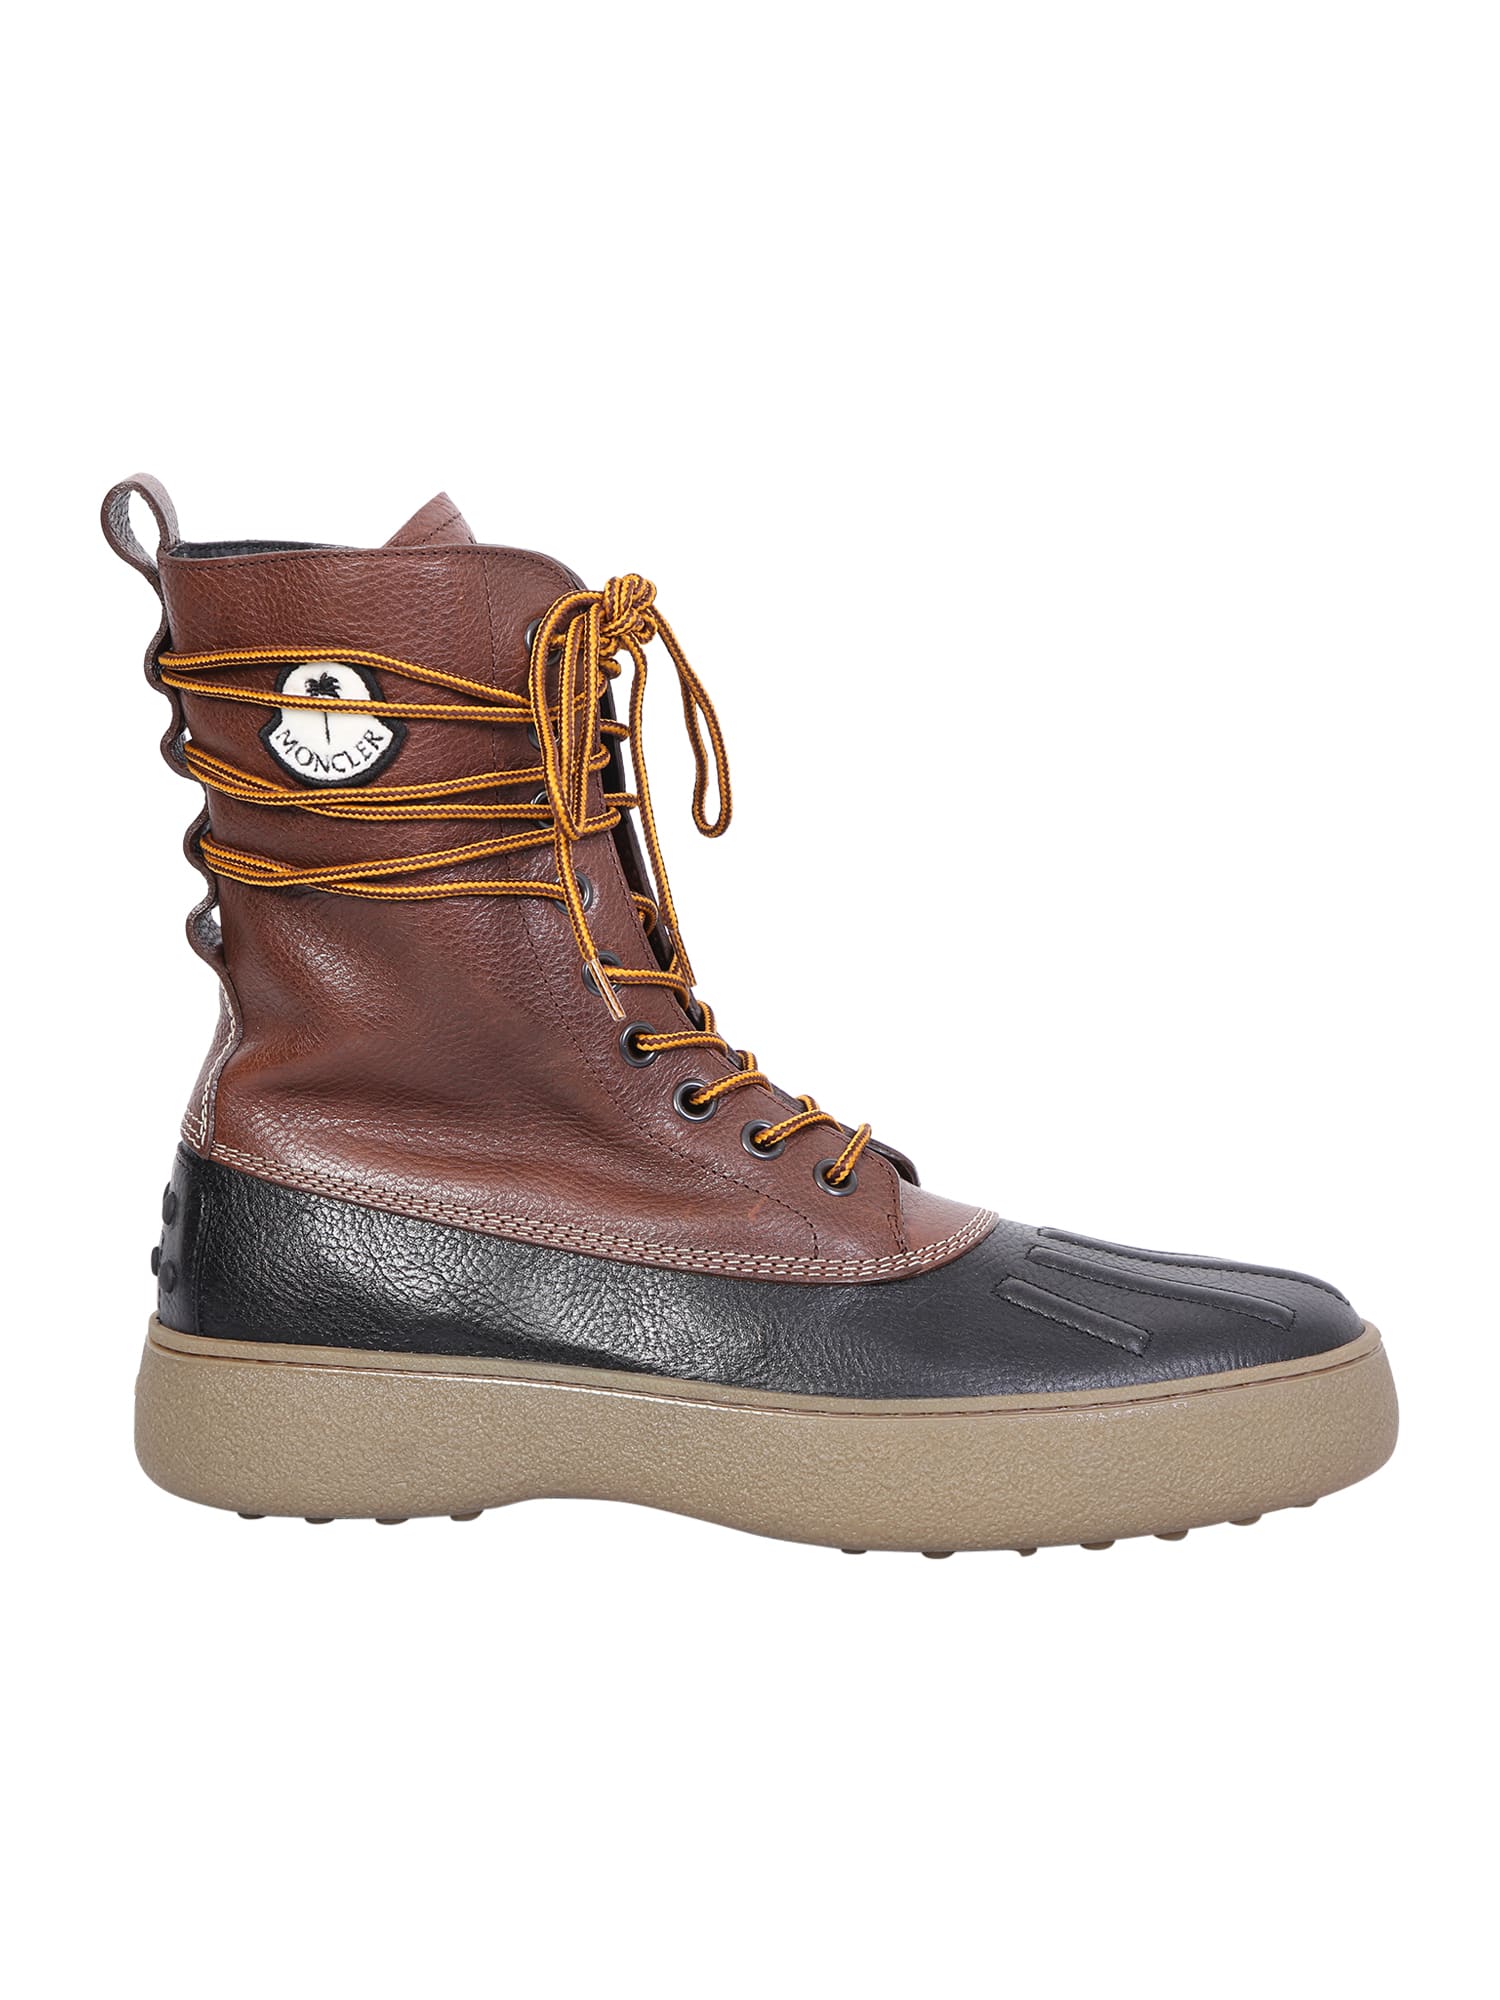 Moncler Genius Winter Gommino Leather Boots